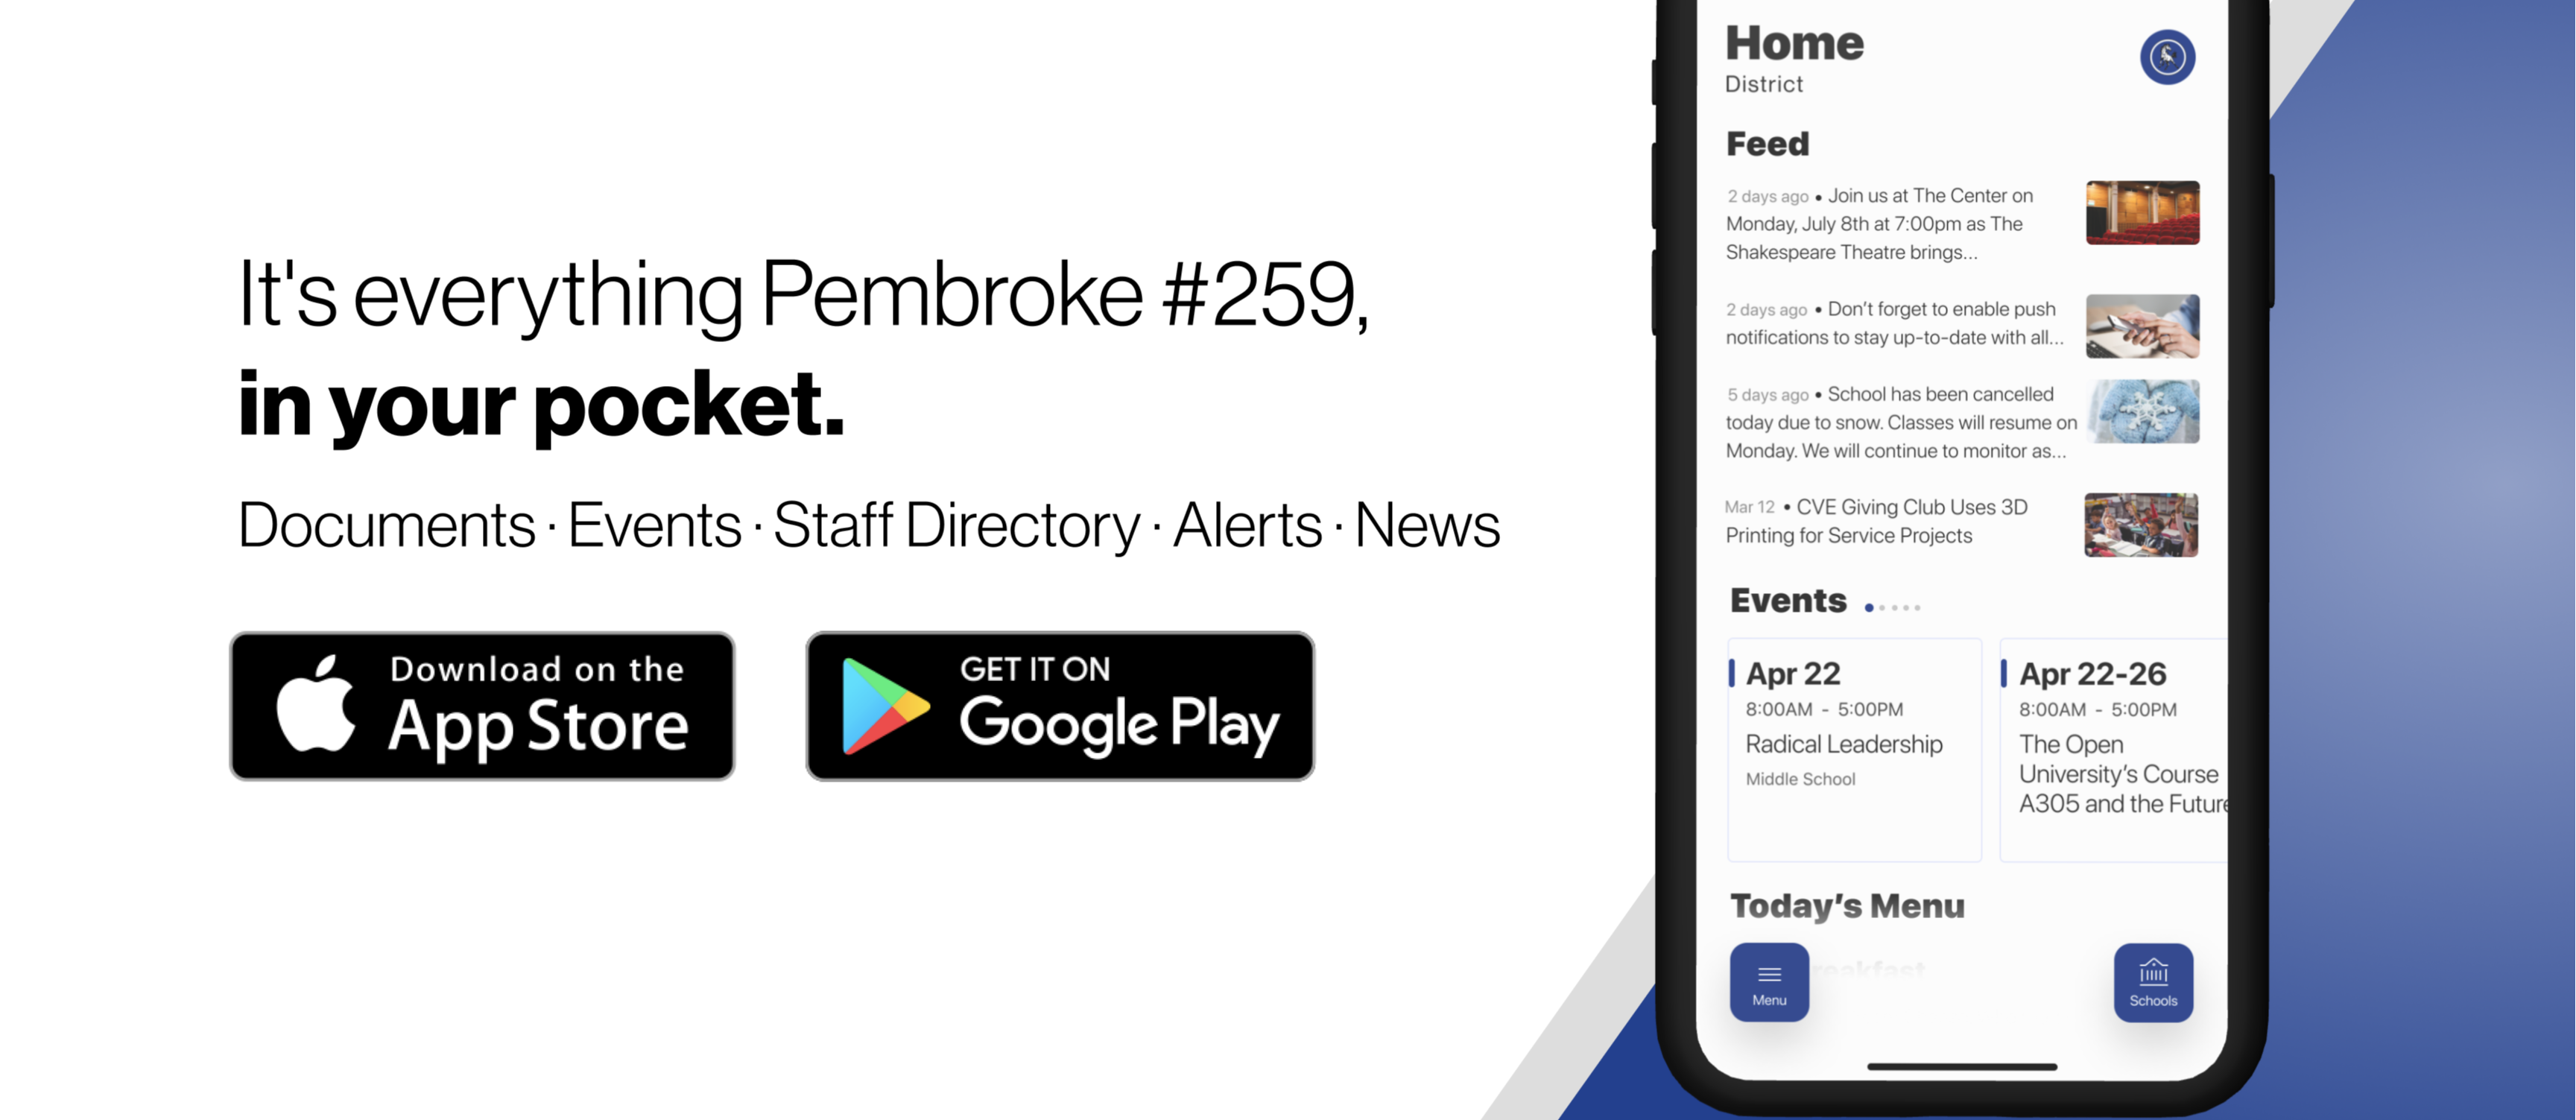 It's everything Pembroke #258, in your pocket - News , Events, Documents, Alerts, Staff Directory - Download on Google Play or App Store 